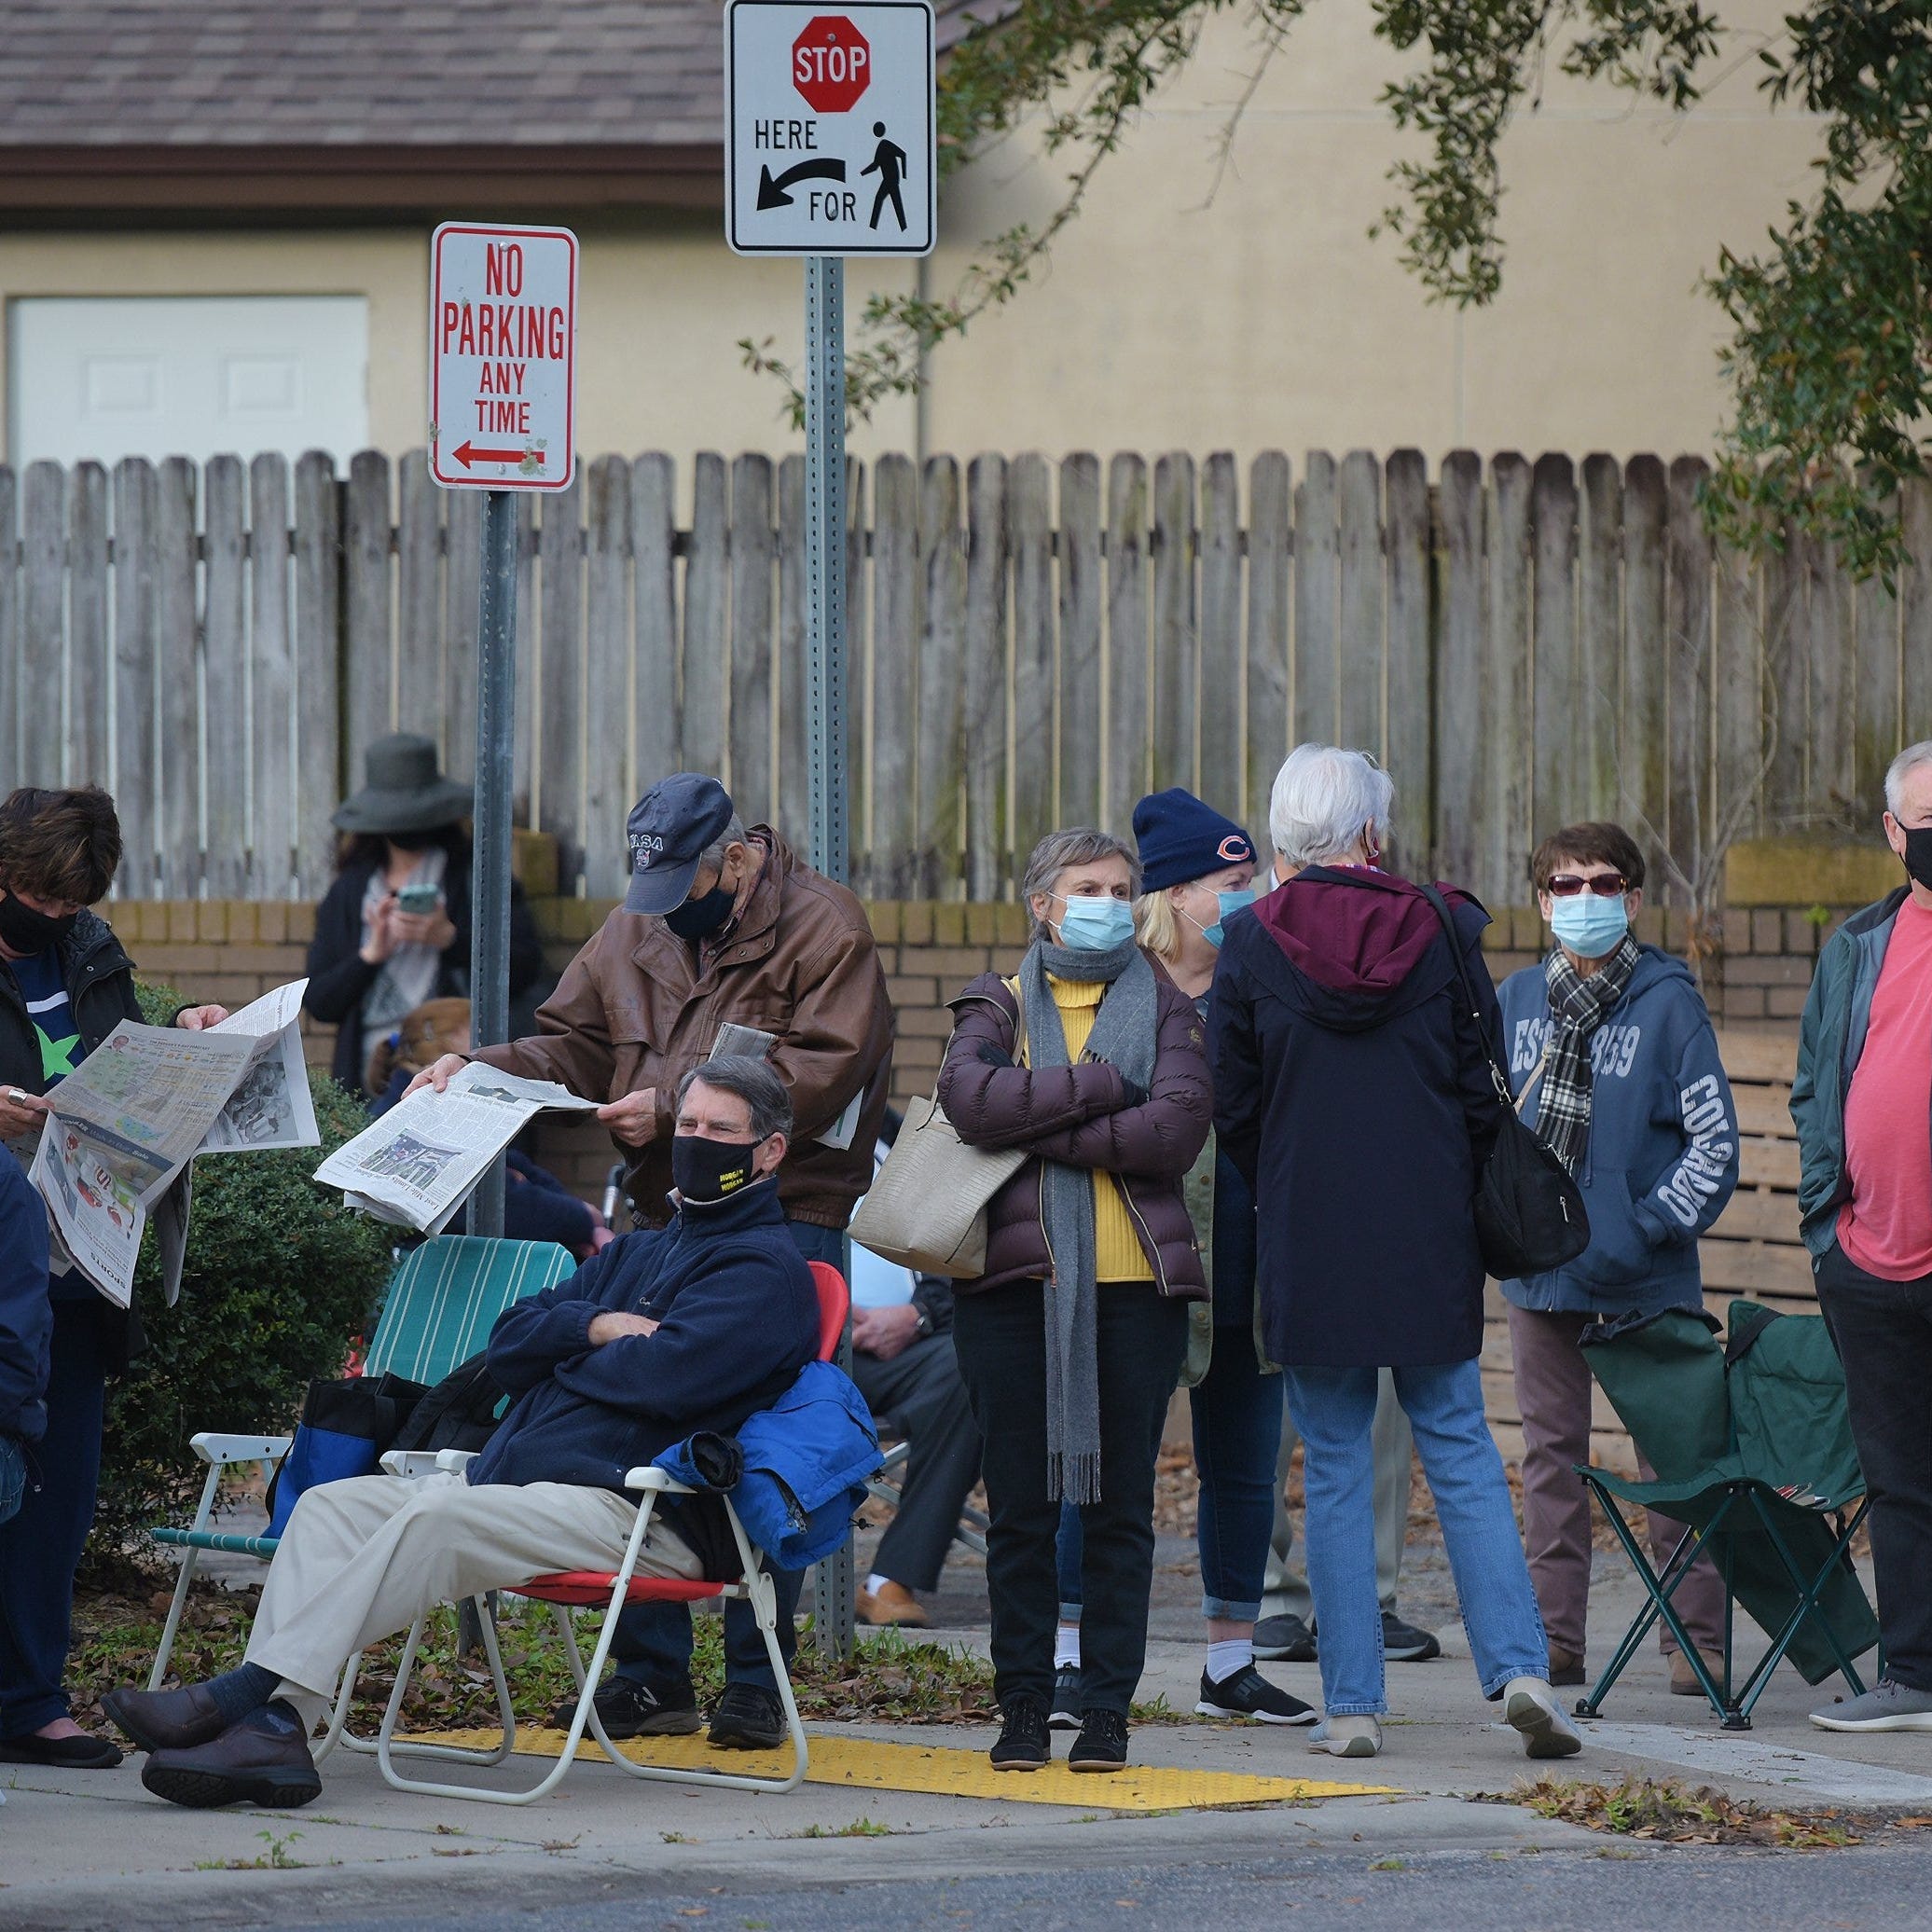 January 11, 2021: A line of Duval County residents snakes around the campus of the Mandarin Senior Center as they wait for COVID-19 vaccine injections at one of two new City of Jacksonville, Fla. vaccine sites.